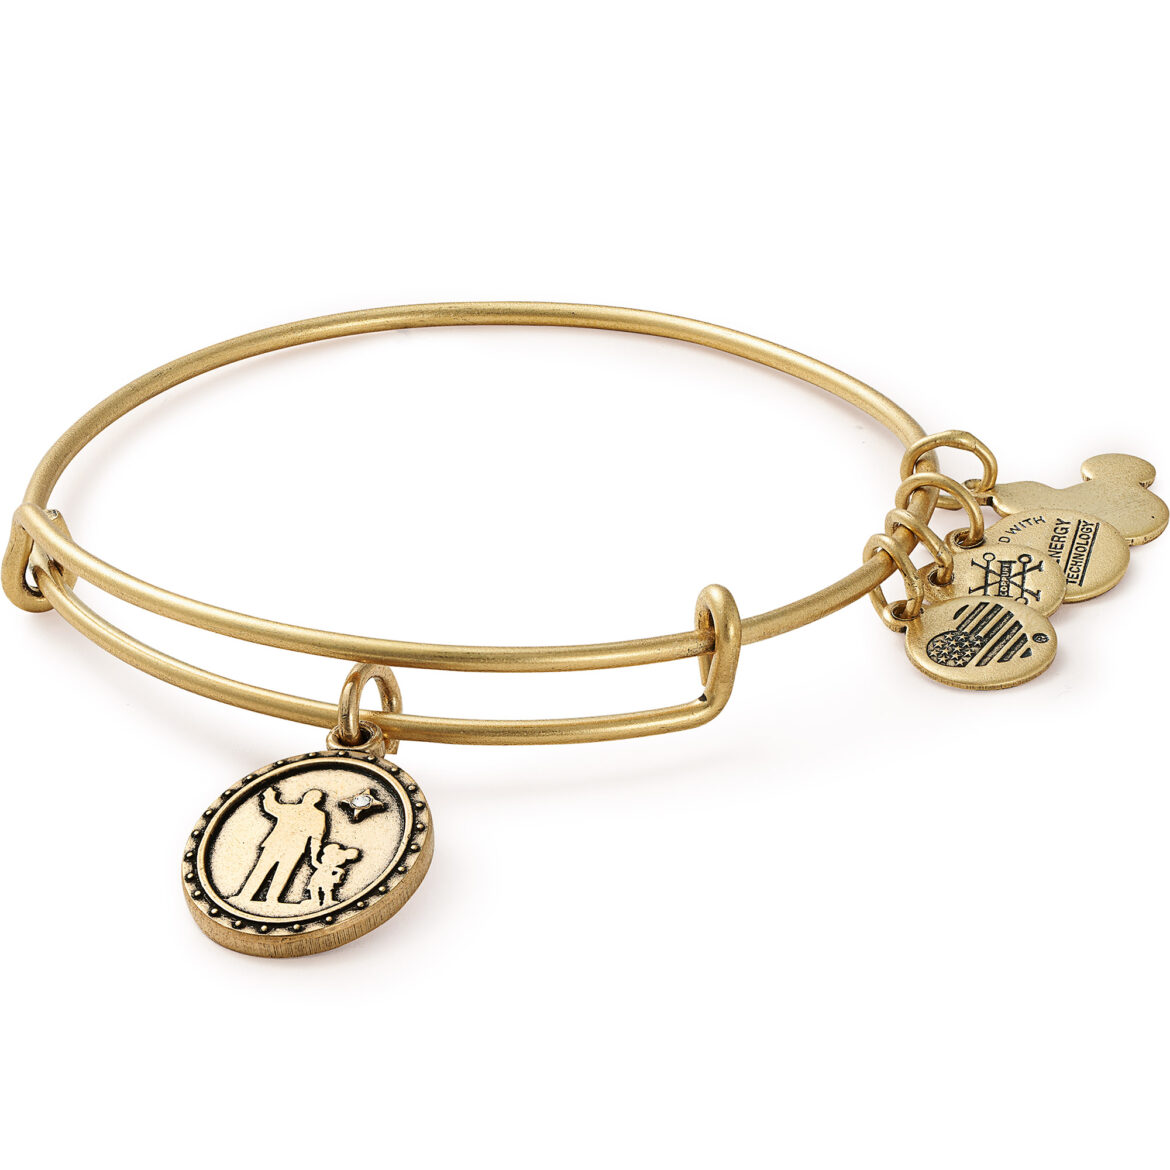 New Disney Alex and Ani Jewelry For The New Year